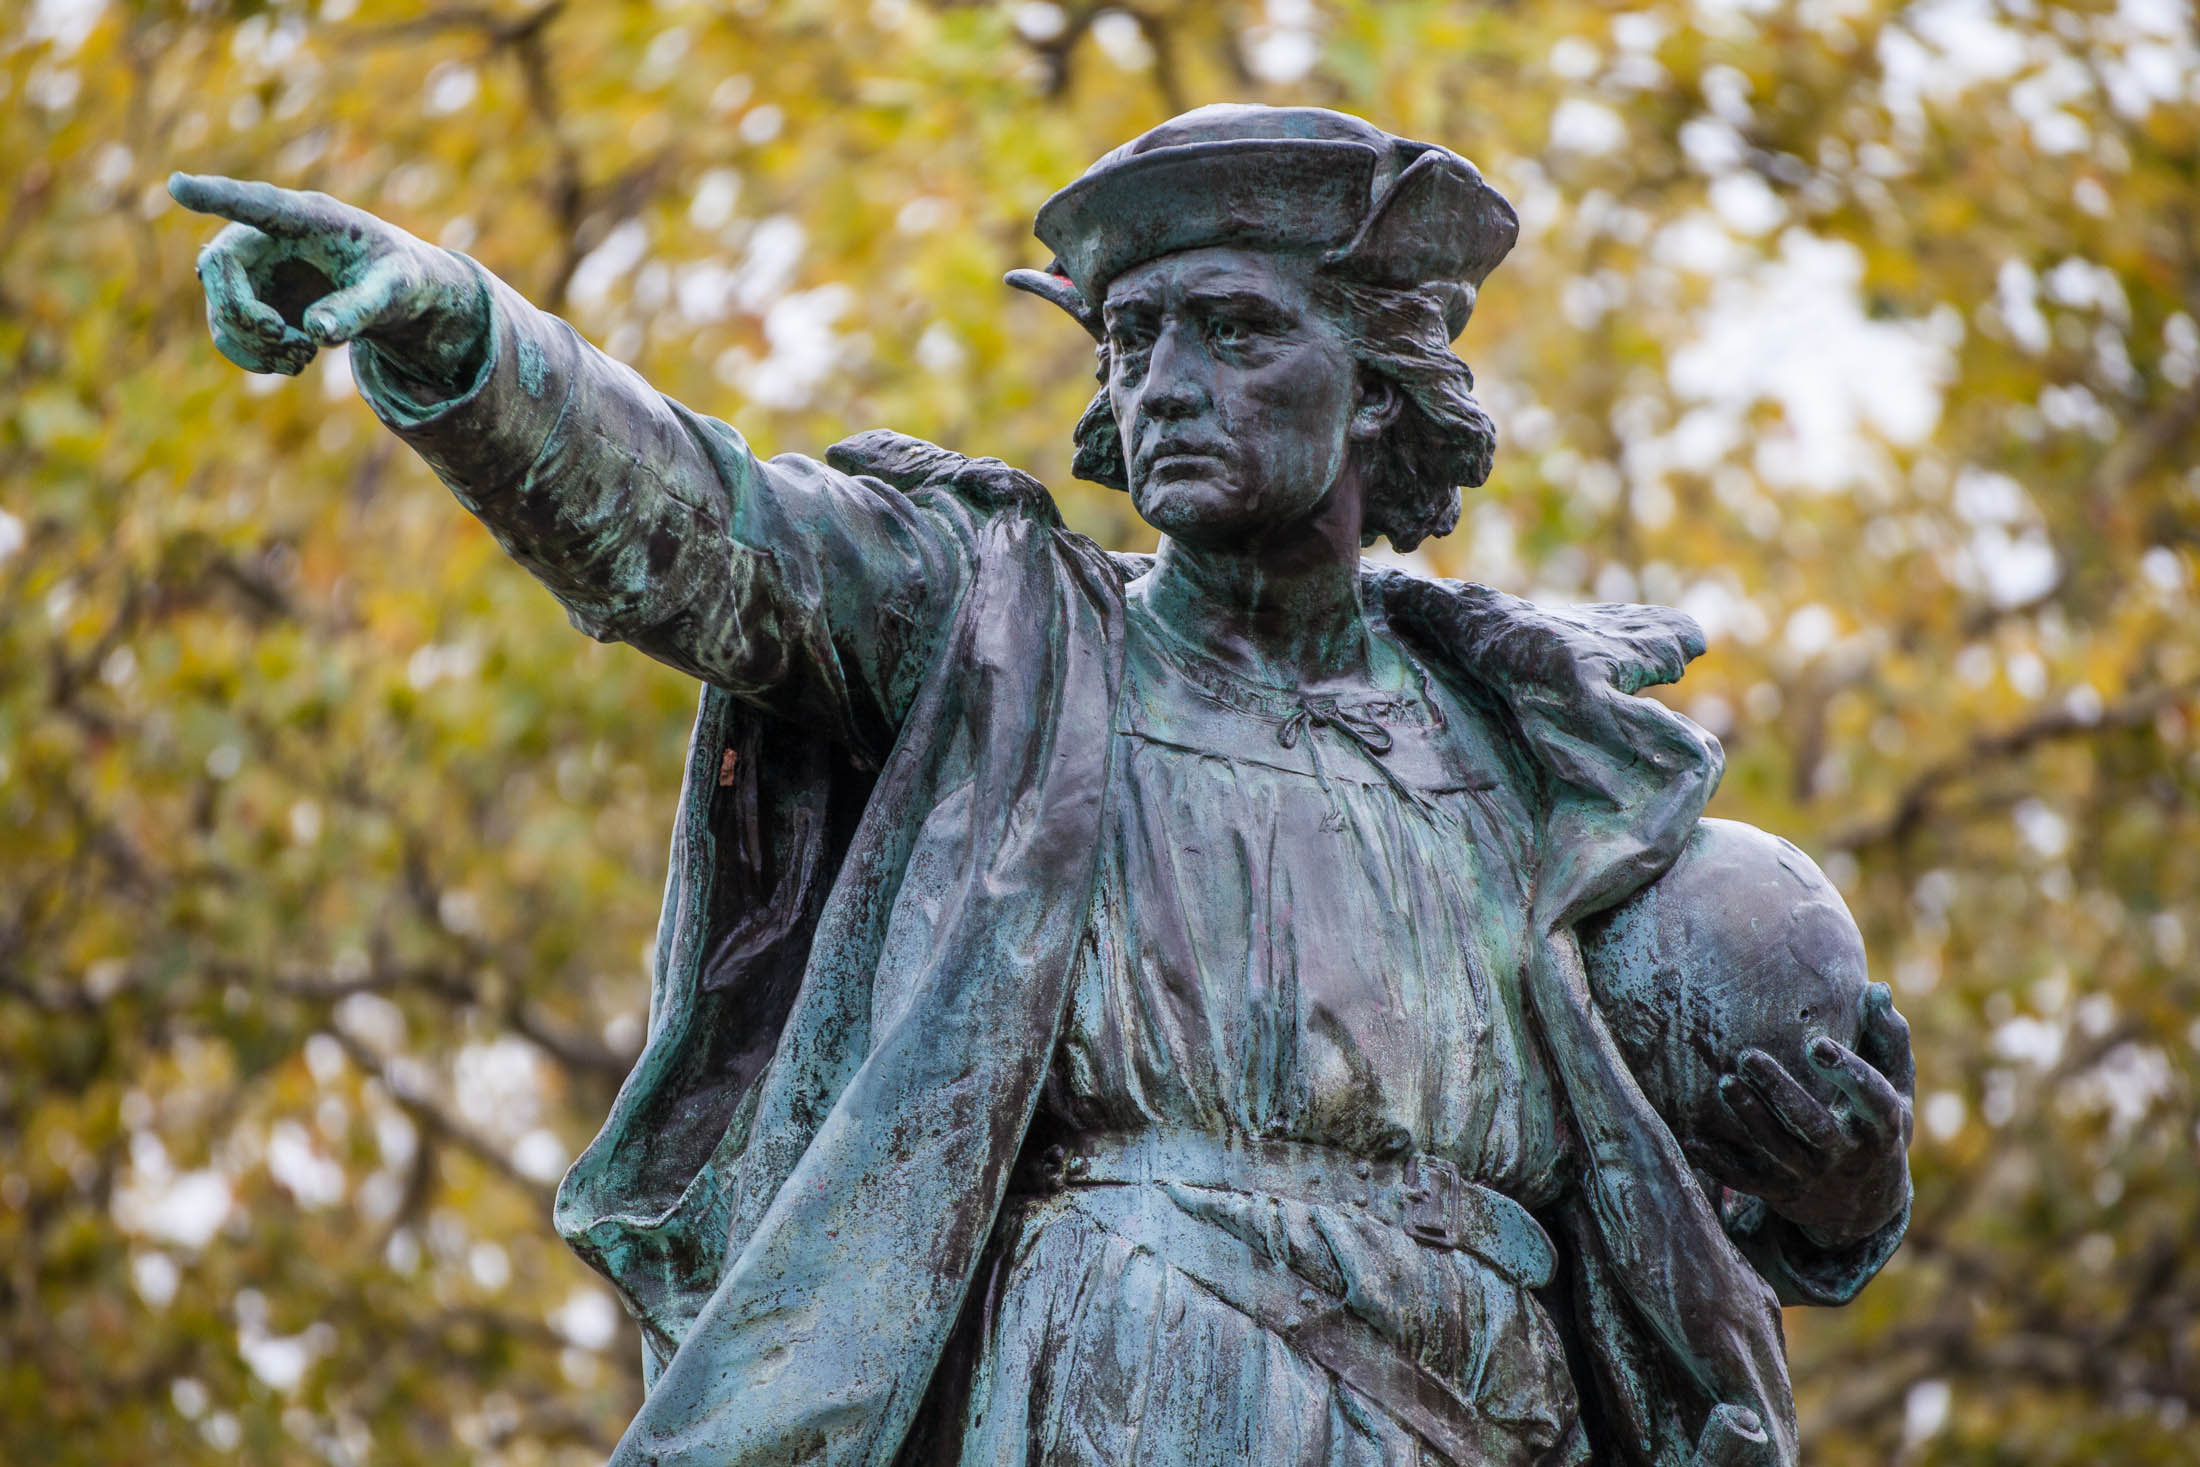 Chicago takes down statues of Columbus, plans review of all monuments